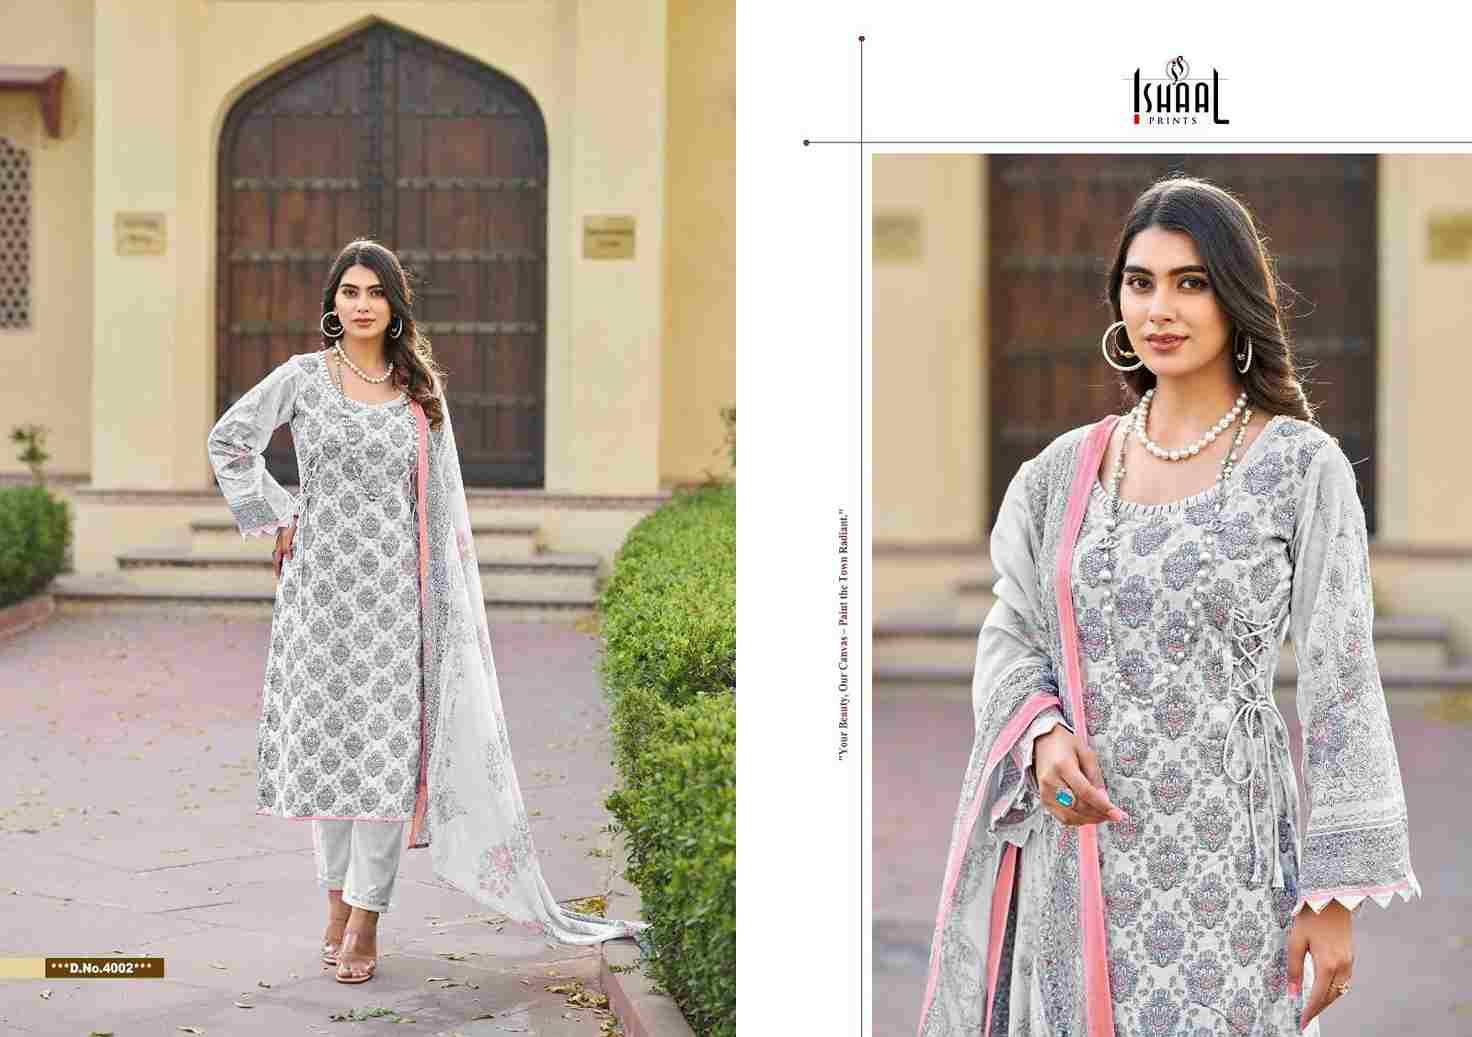 Kesariya Vol-4 By Ishaal Prints 4001 To 4008 Series Beautiful Festive Suits Stylish Fancy Colorful Casual Wear & Ethnic Wear Pure Lawn Embroidered Dresses At Wholesale Price